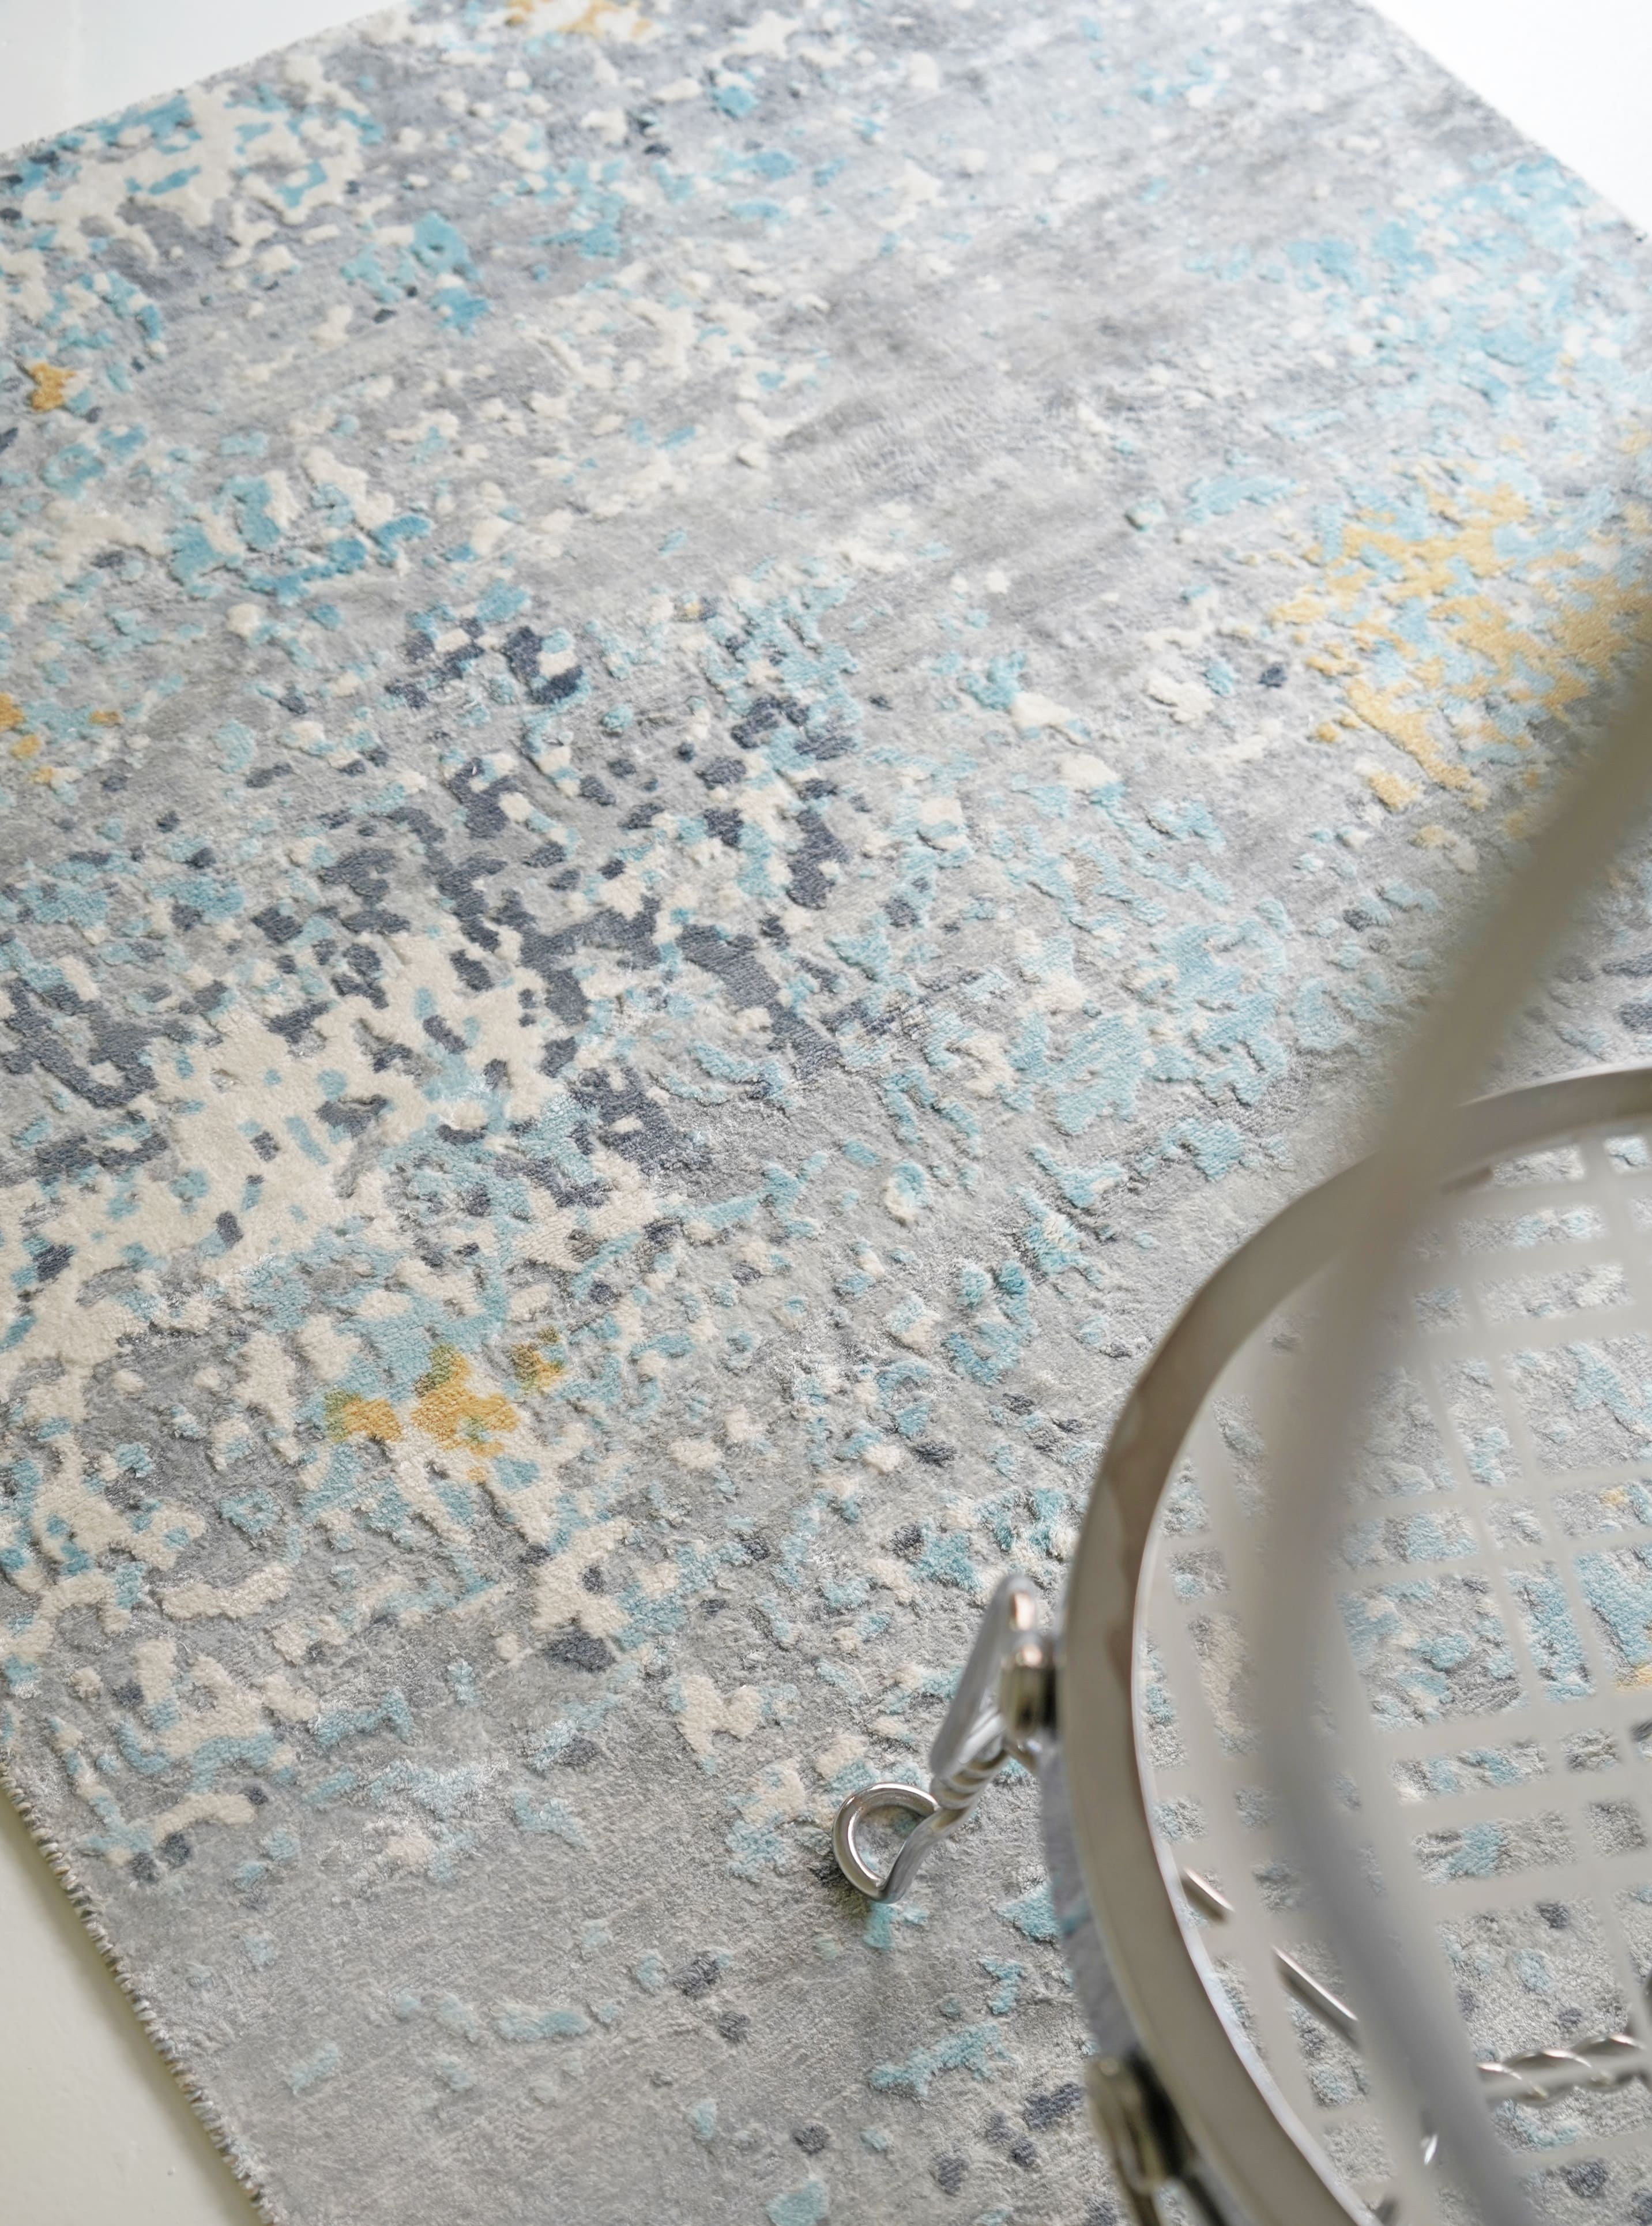 Load image into Gallery viewer, Aquamarine Abstract Rug